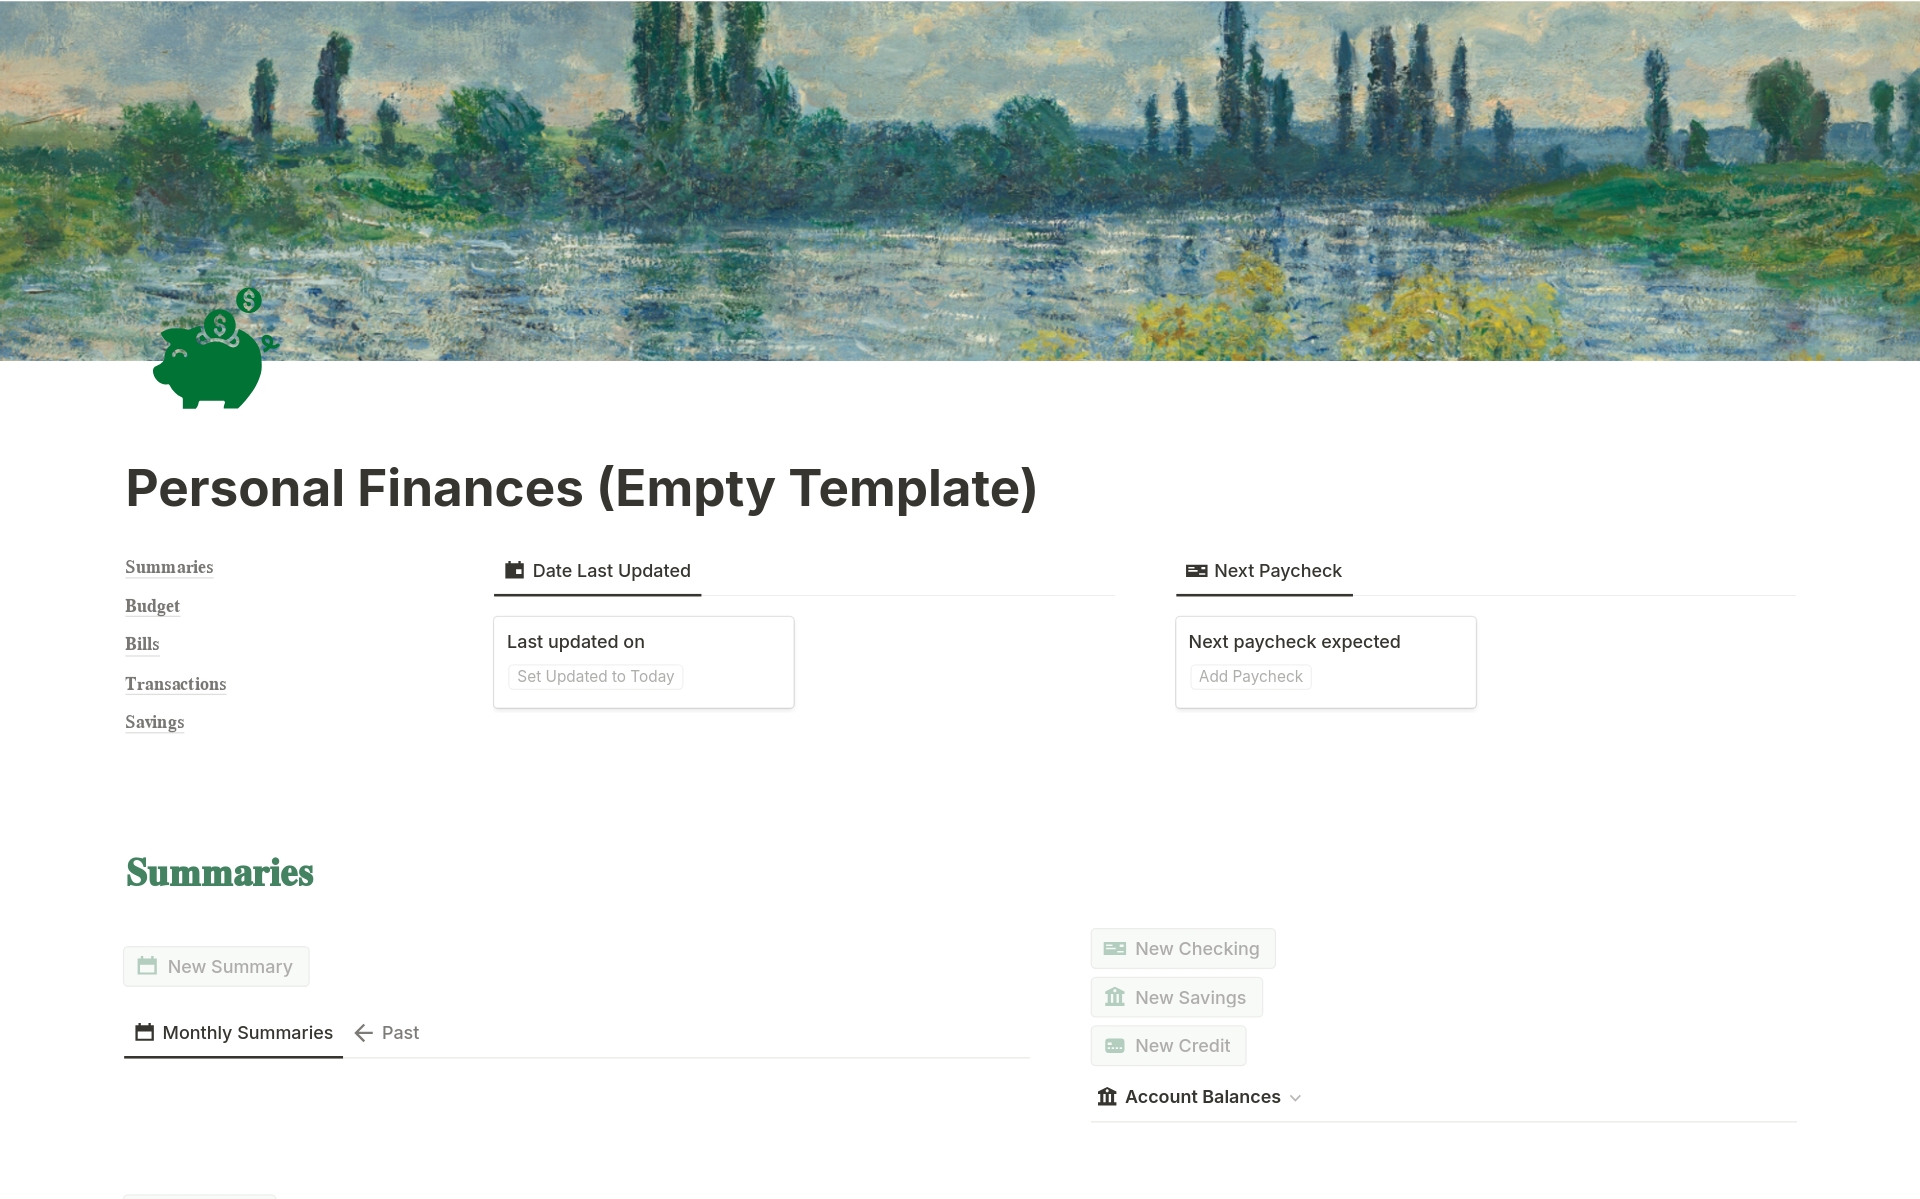 A feature-filled, highly customizable template for managing all things personal finance. It includes tables and formulas for monthly spending summaries, managing all types of transactions, budgeting, tracking recurring bills, savings goals, and more!